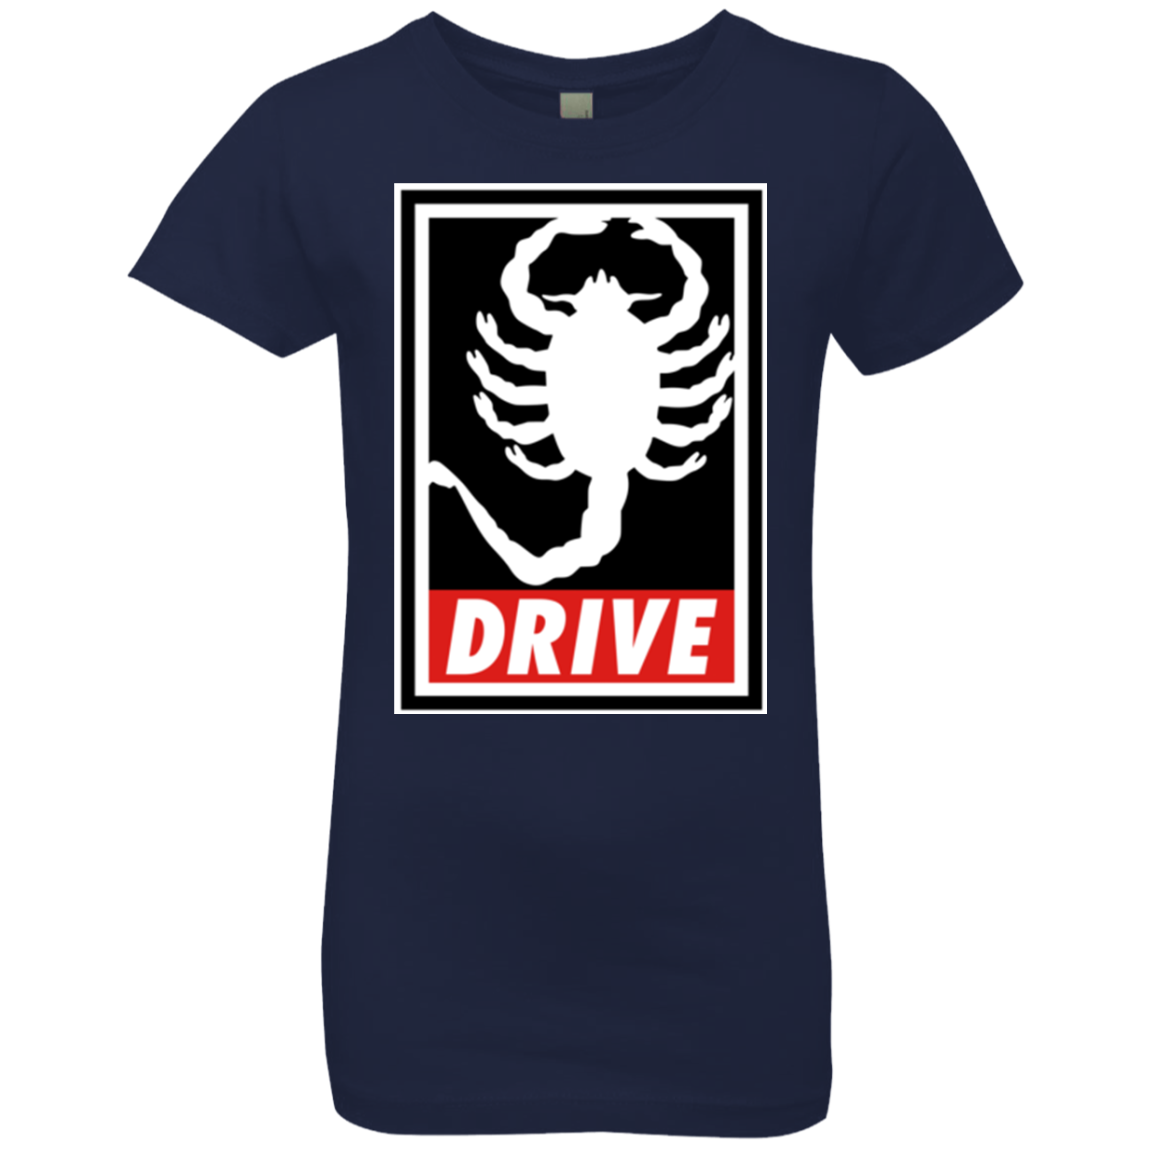 Obey and drive Girls Premium T-Shirt